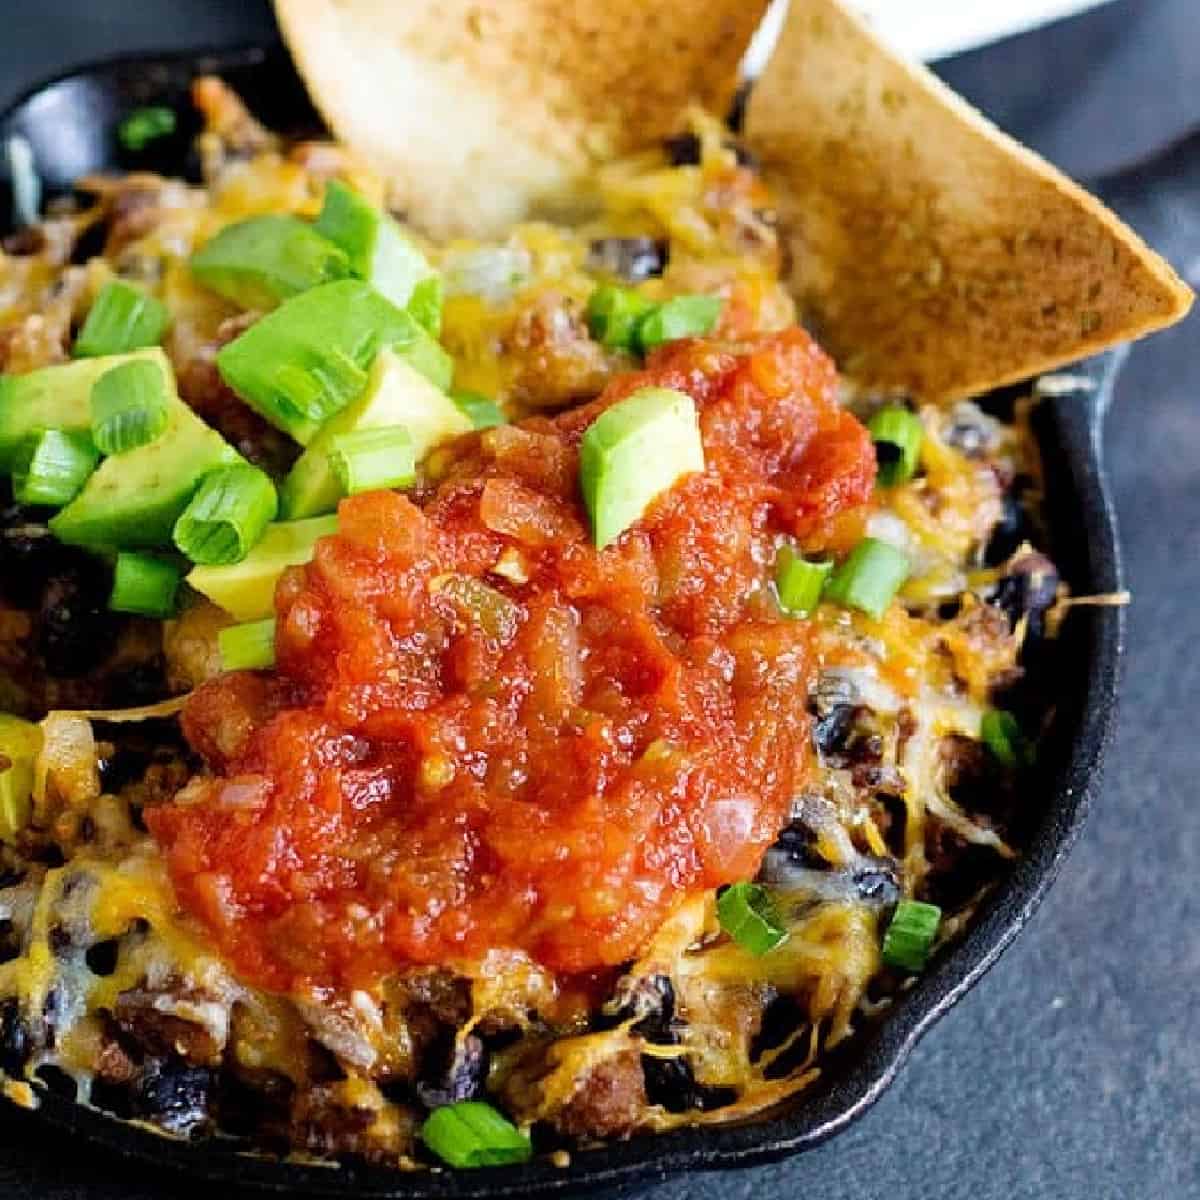 This cheesy taco dip will be the star of your parties and gathering! Serve it with homemade rosemary garlic tortilla chips for more flavor! Game days are going to be delicious!
